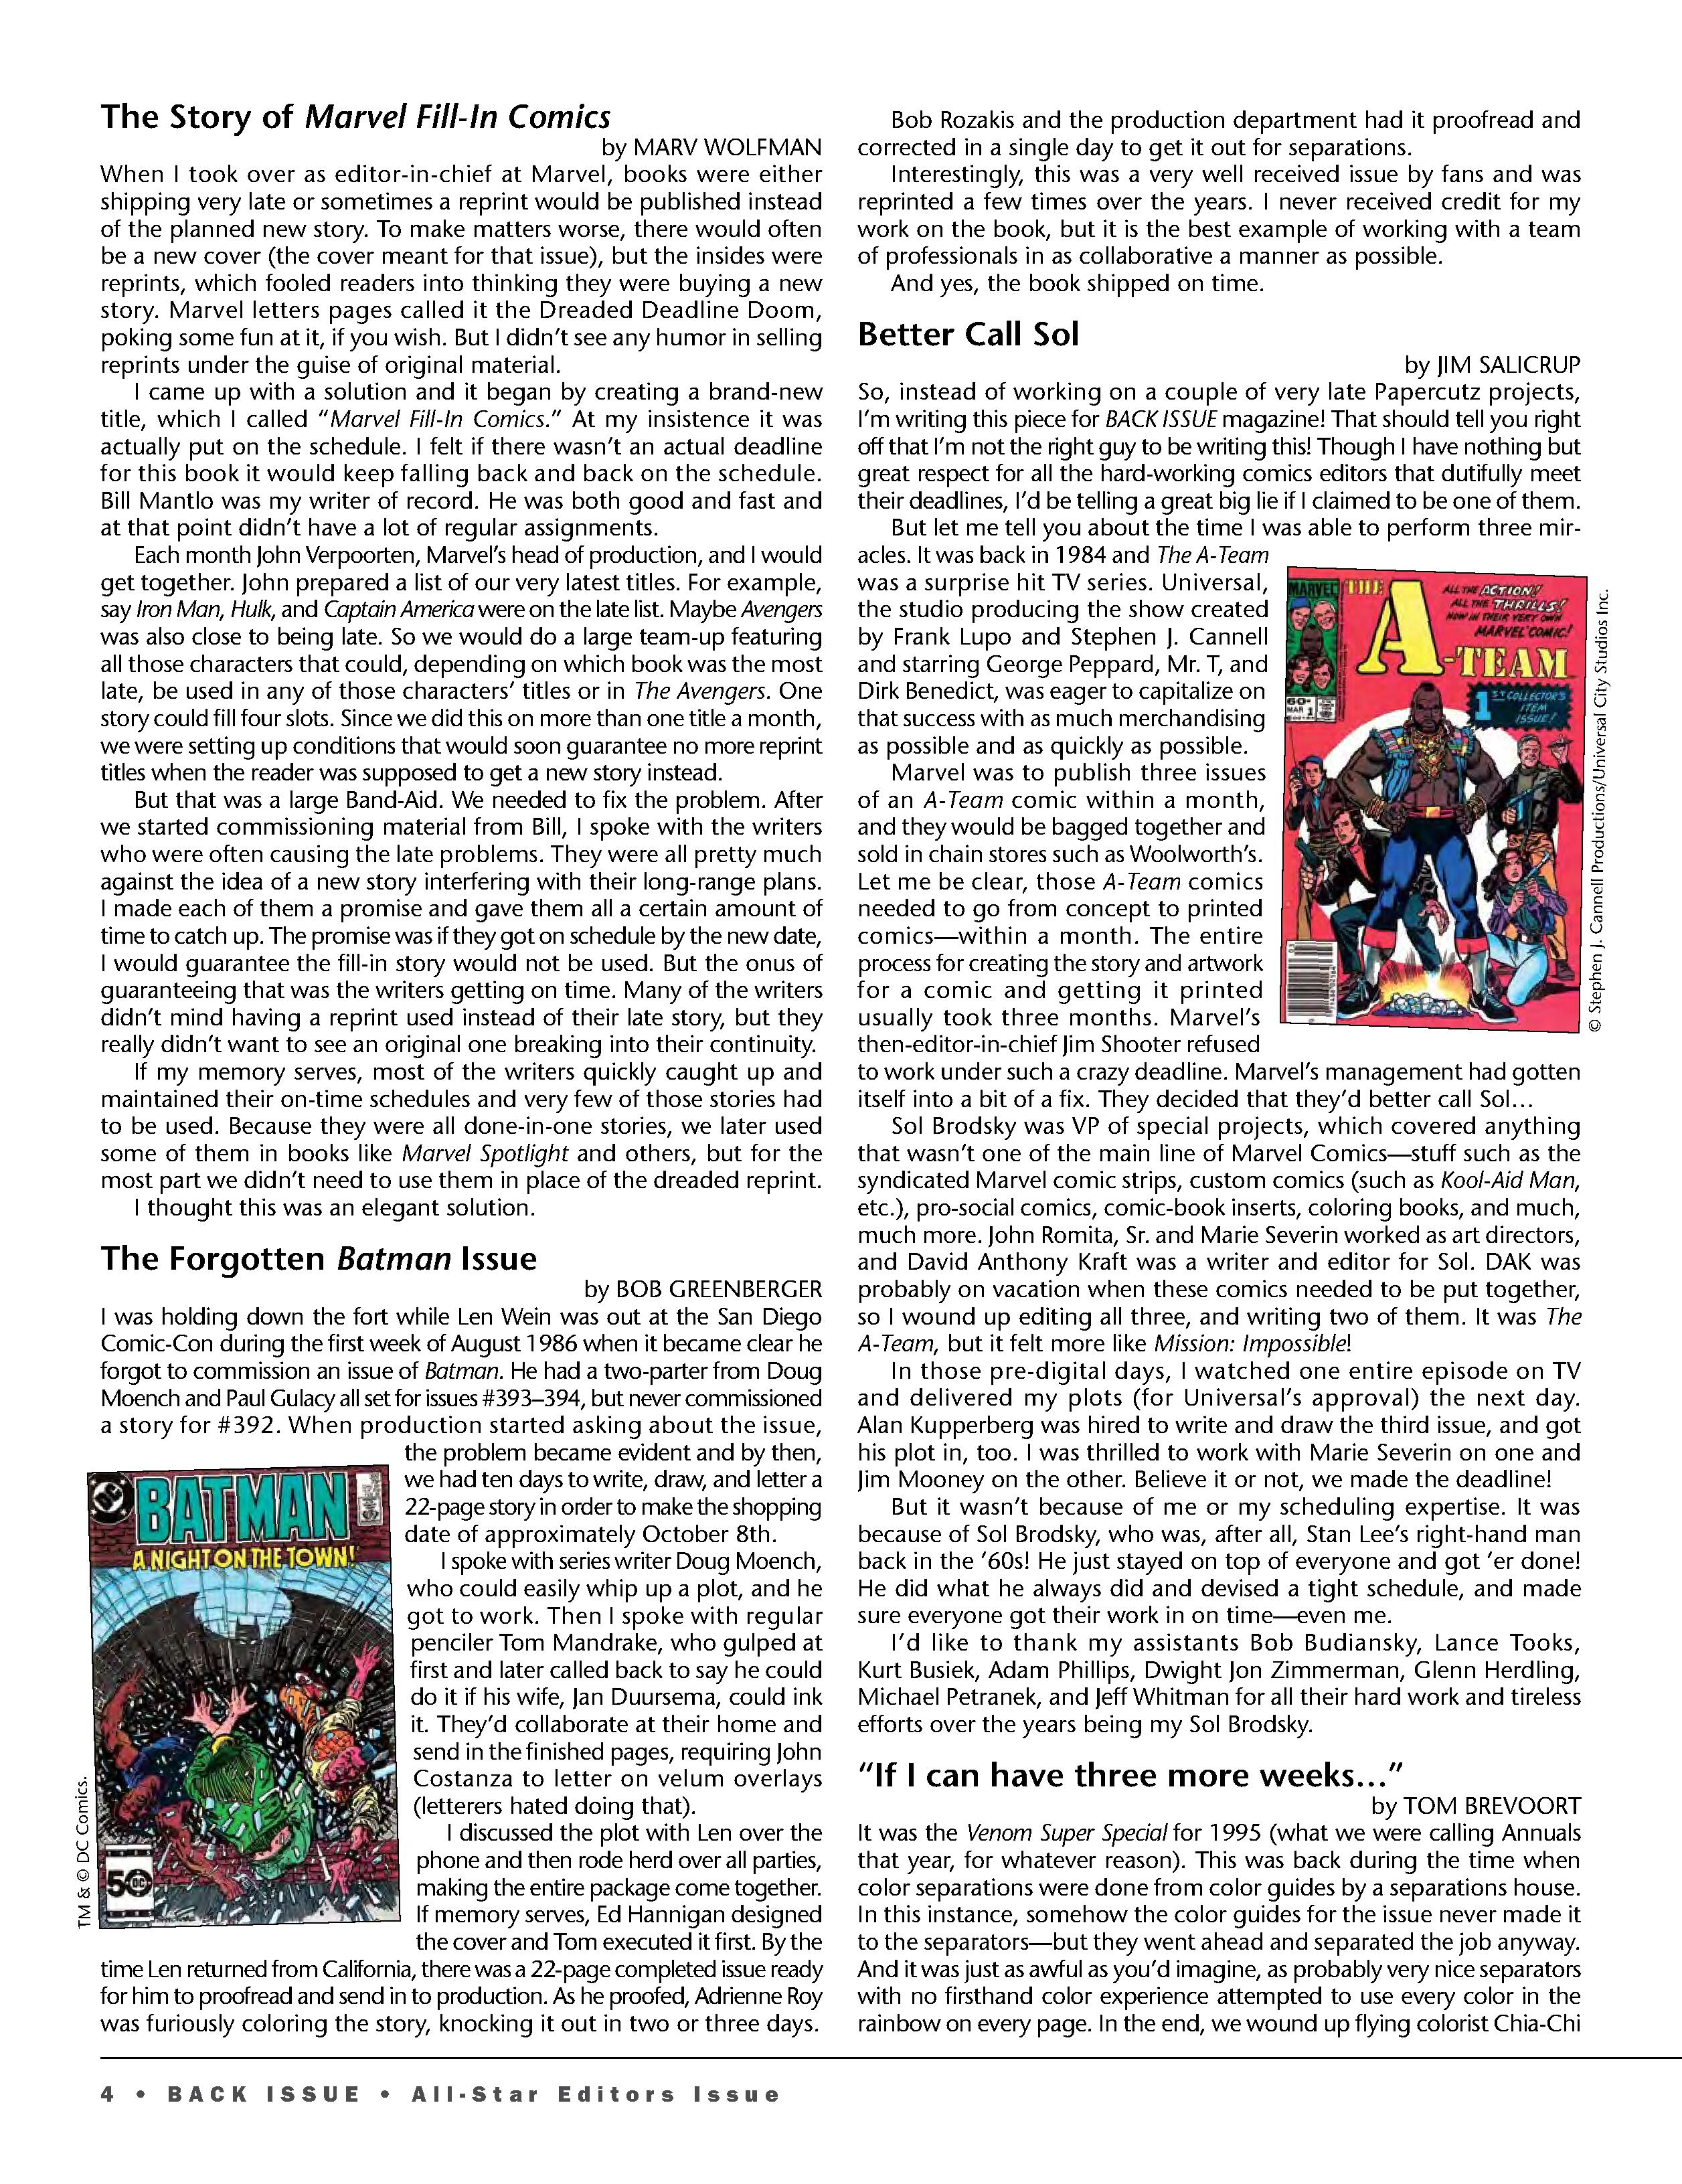 Read online Back Issue comic -  Issue #103 - 6